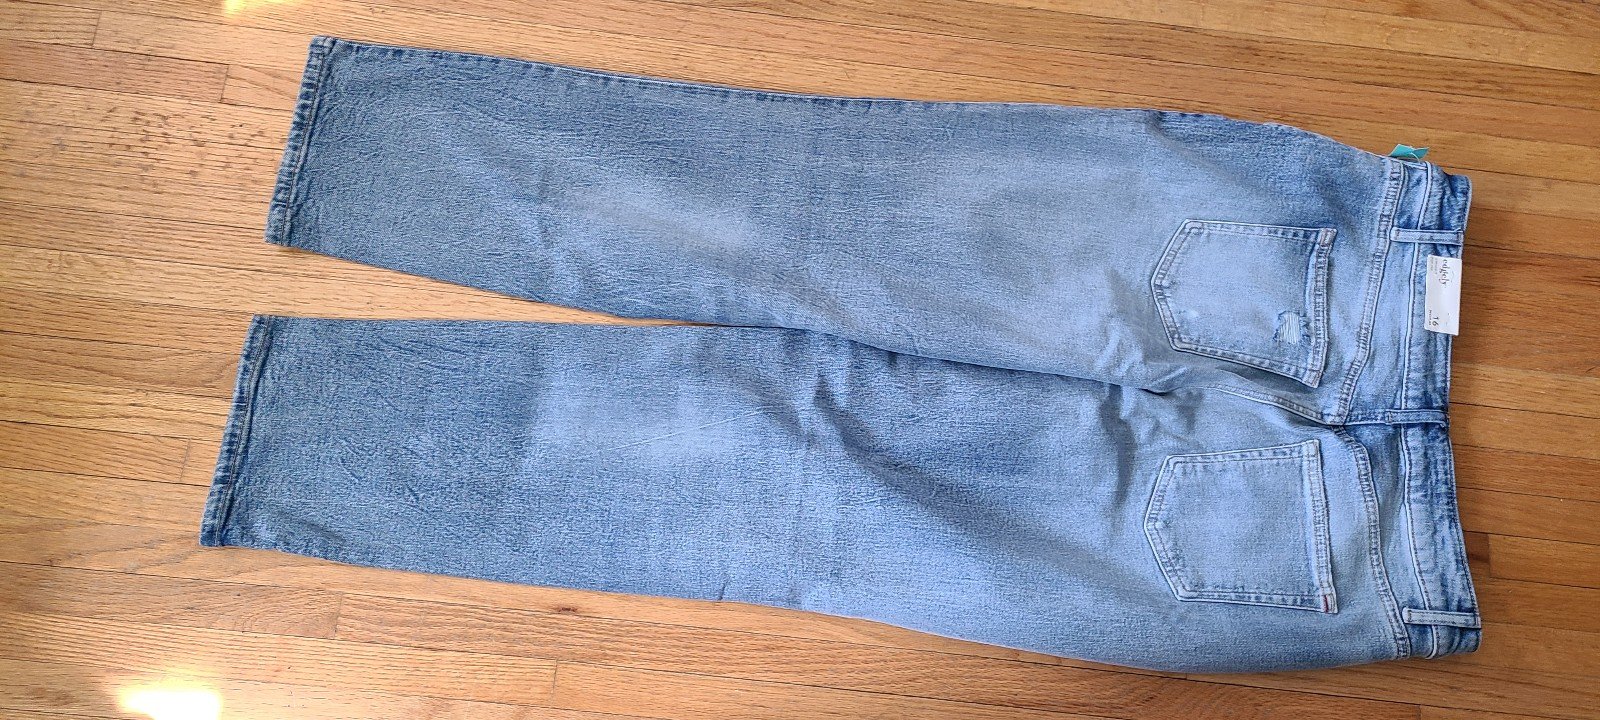 The Best Seller NWT EDGELY JEANS BY MAURICES,  16 REGULAR iEcSE4EKB Counter Genuine 